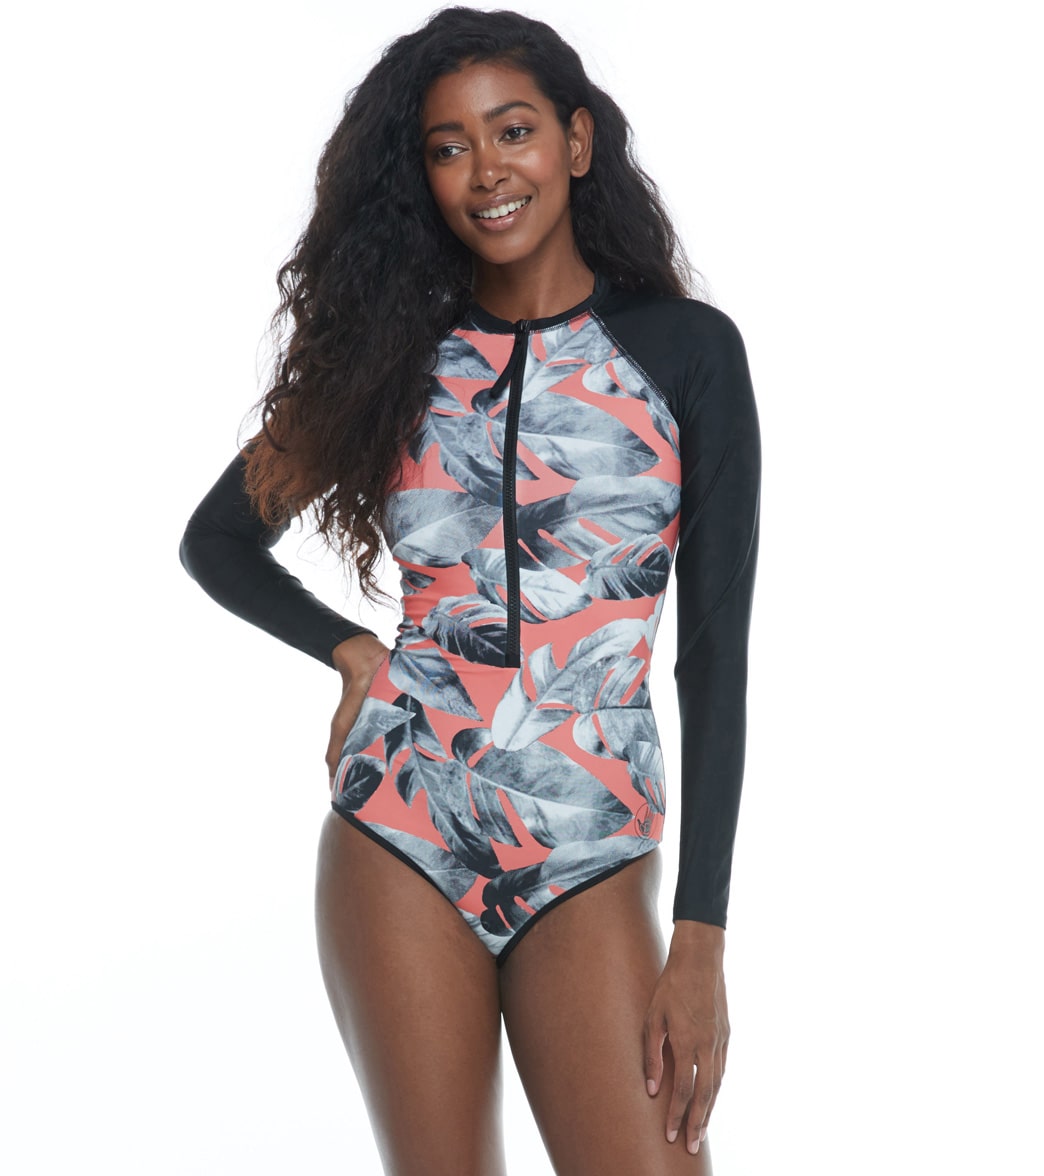 Body Glove Women's Lost Chanel Long Sleeve One Piece Swimsuit - Coral Medium - Swimoutlet.com